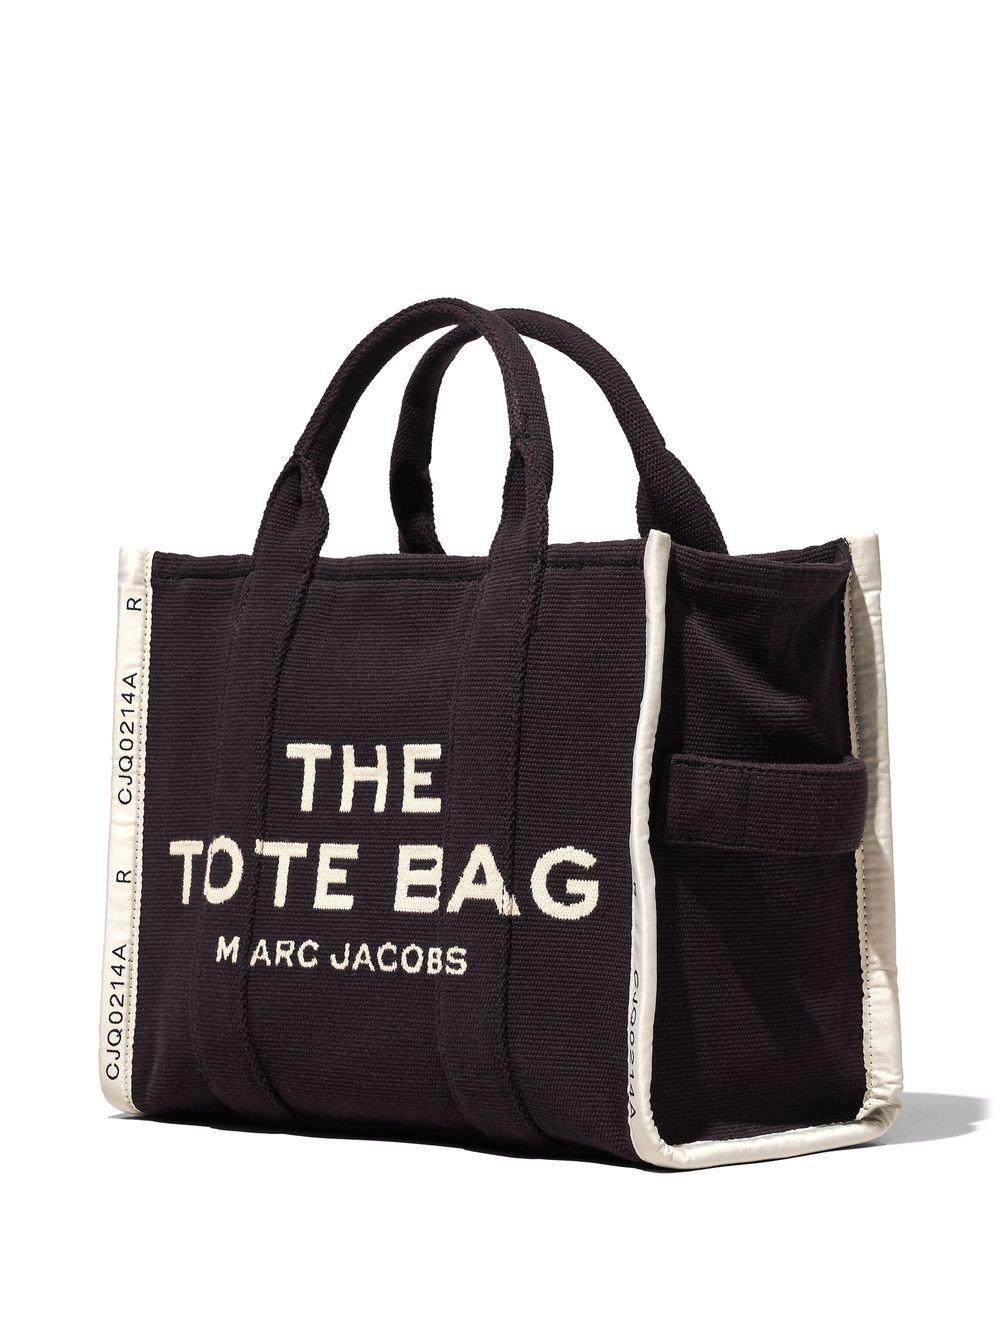 The Small Tote Bag Marc Jacobs Negro